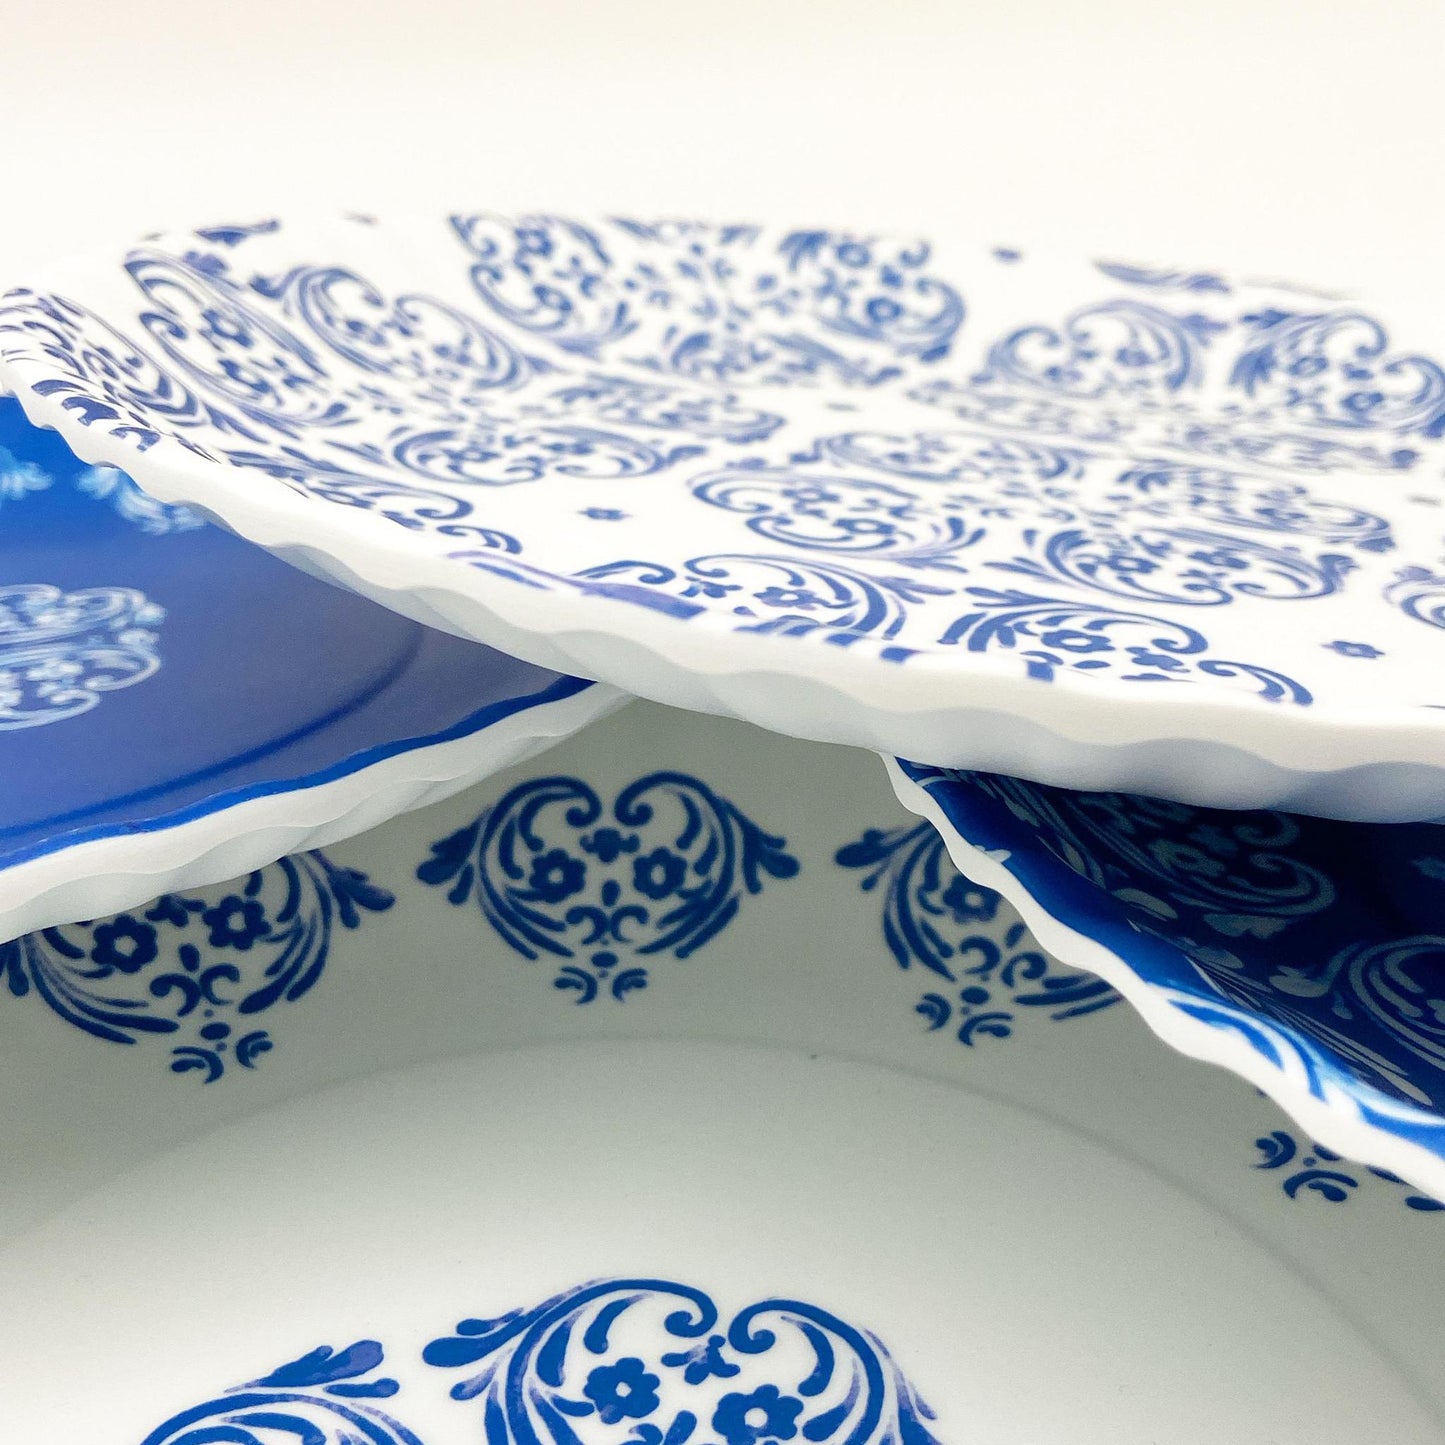 Plate - Melamine "Paper Plate" - Blue with White Medallion